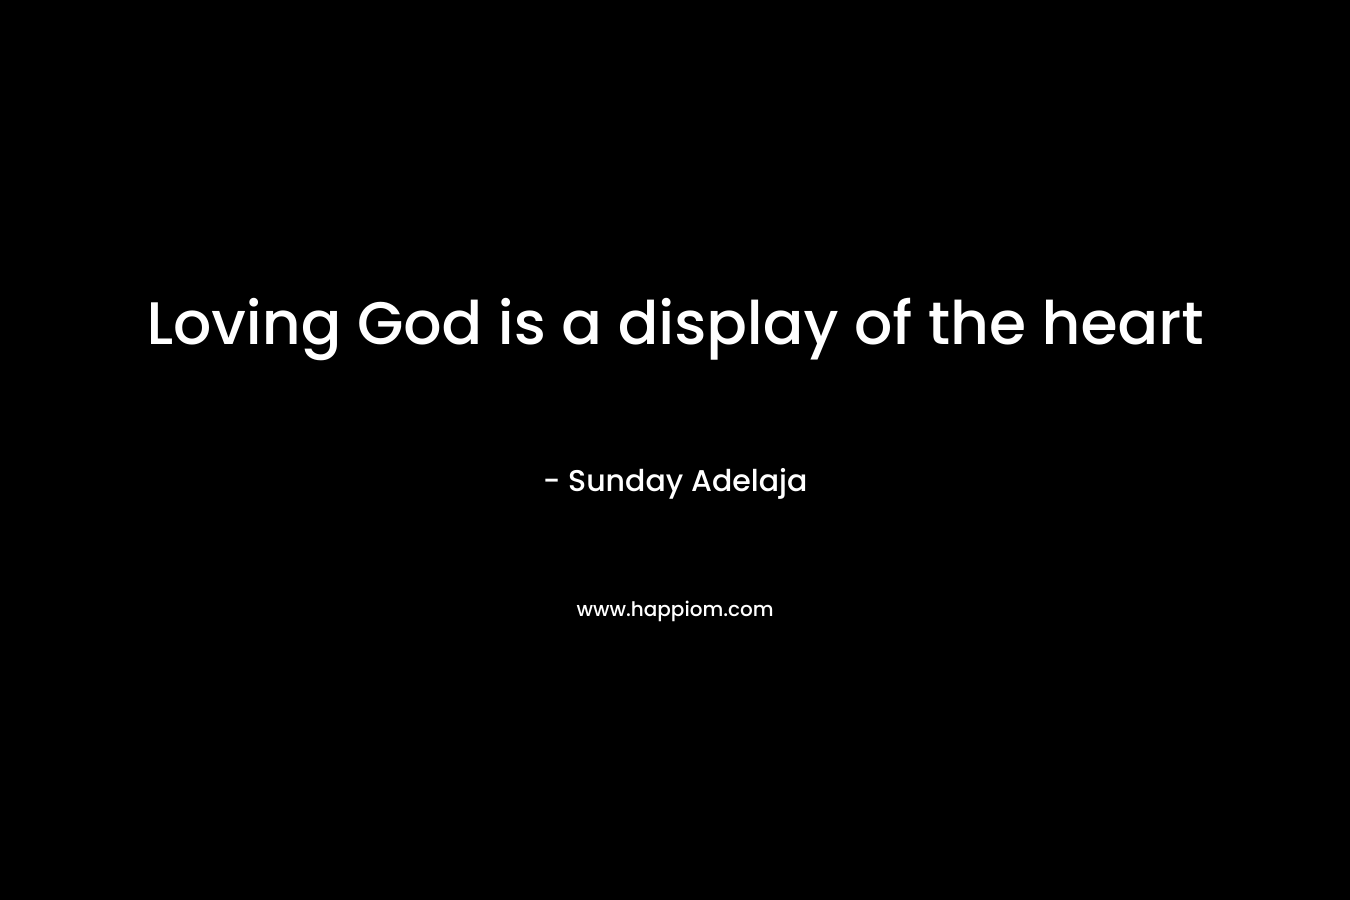 Loving God is a display of the heart